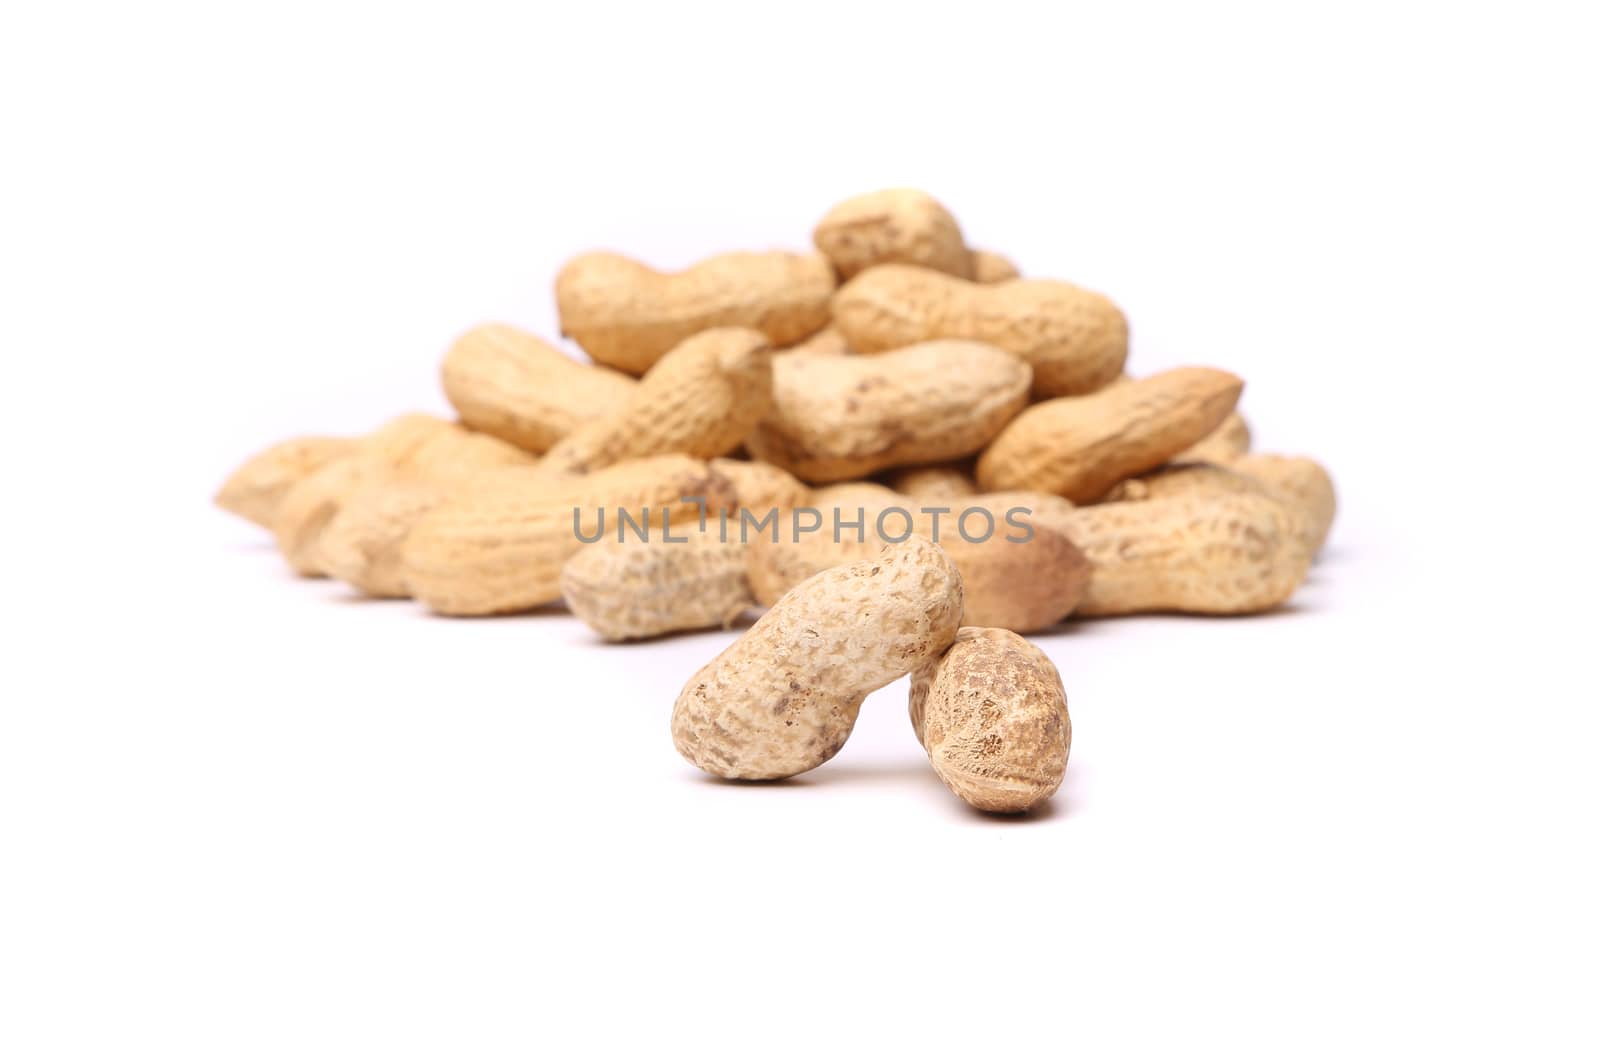 Two peanuts in closeup on the peanut background